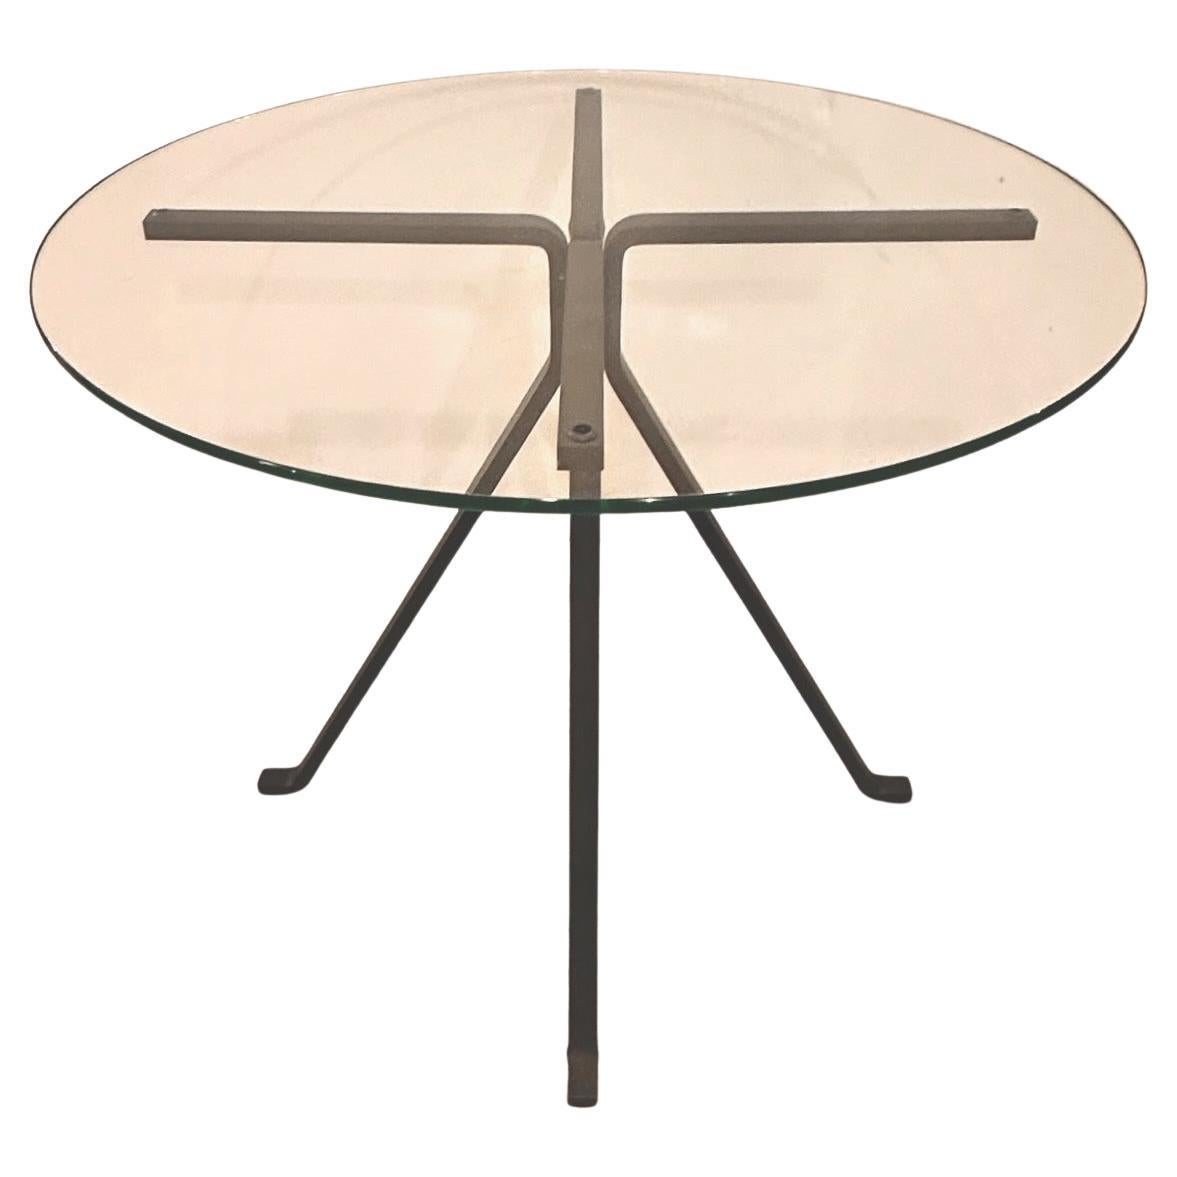 Enzo Mari  Original Round and Glass Coffee Table for Driade .Italy.  1970 For Sale